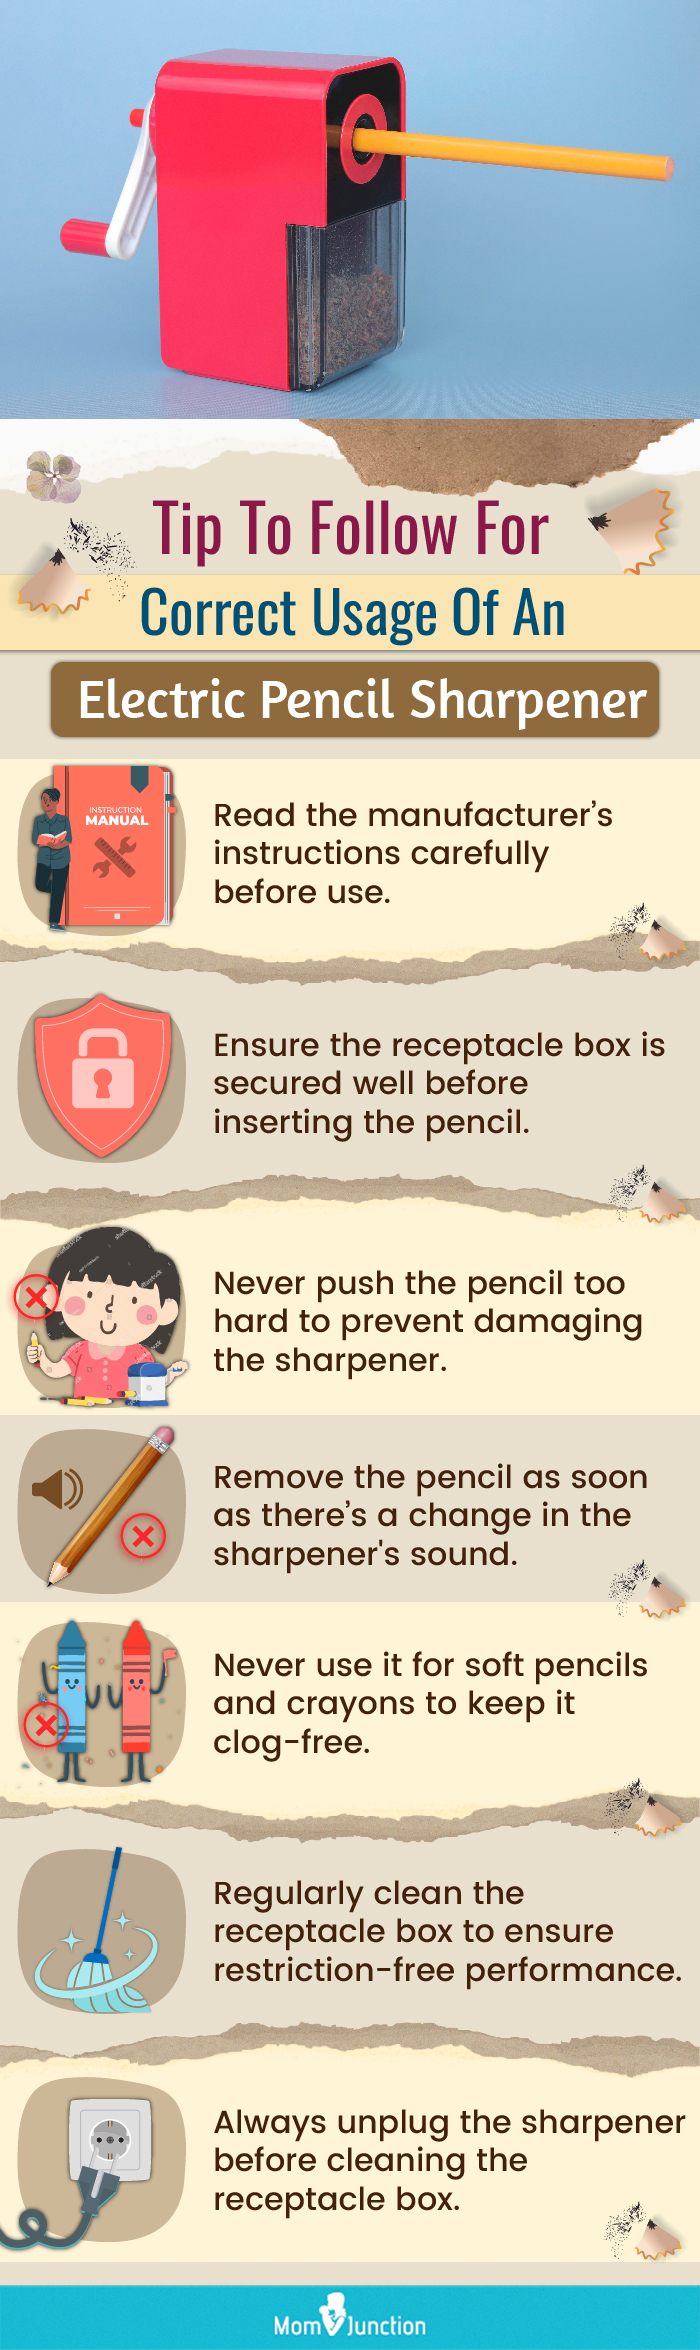 Tip To Follow For Correct Usage Of An Electric Pencil Sharpener (infographic)